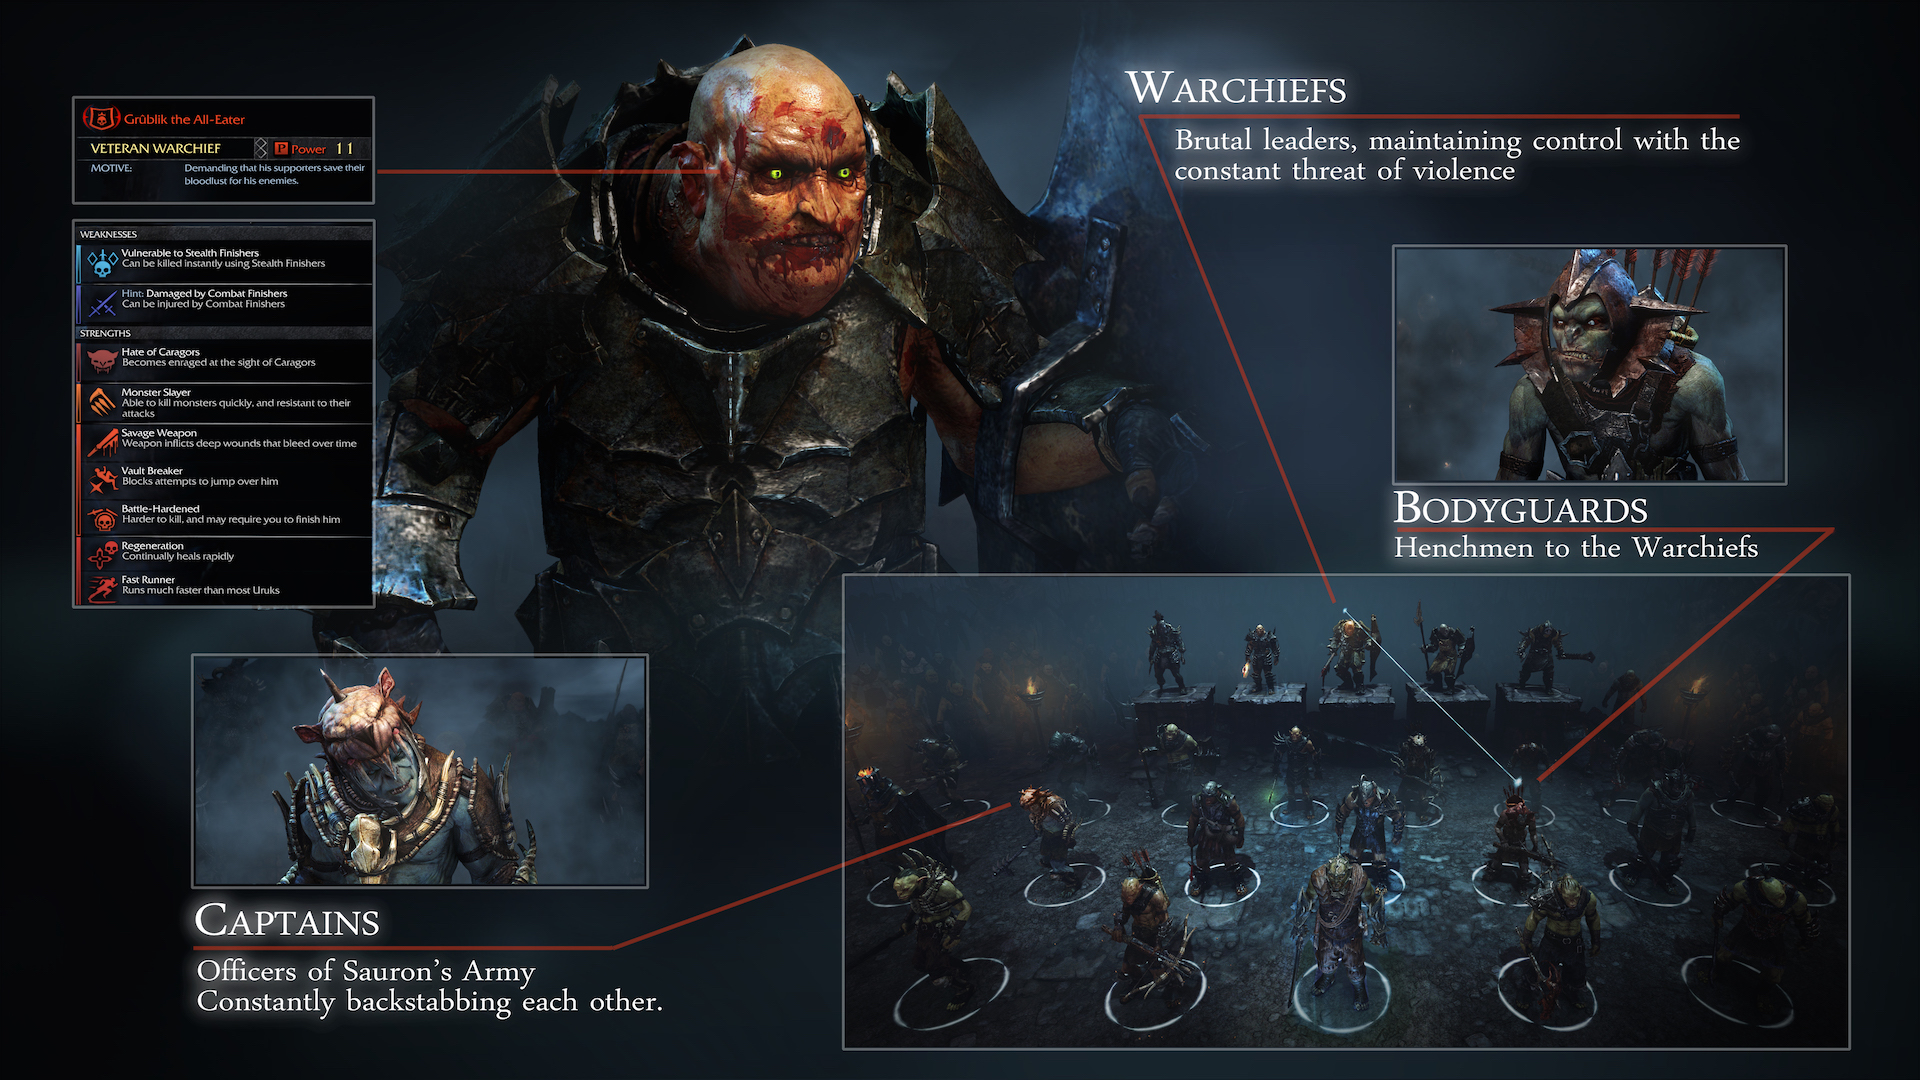 Shadow of Mordor is more than just Assassin's Creed in Middle-earth